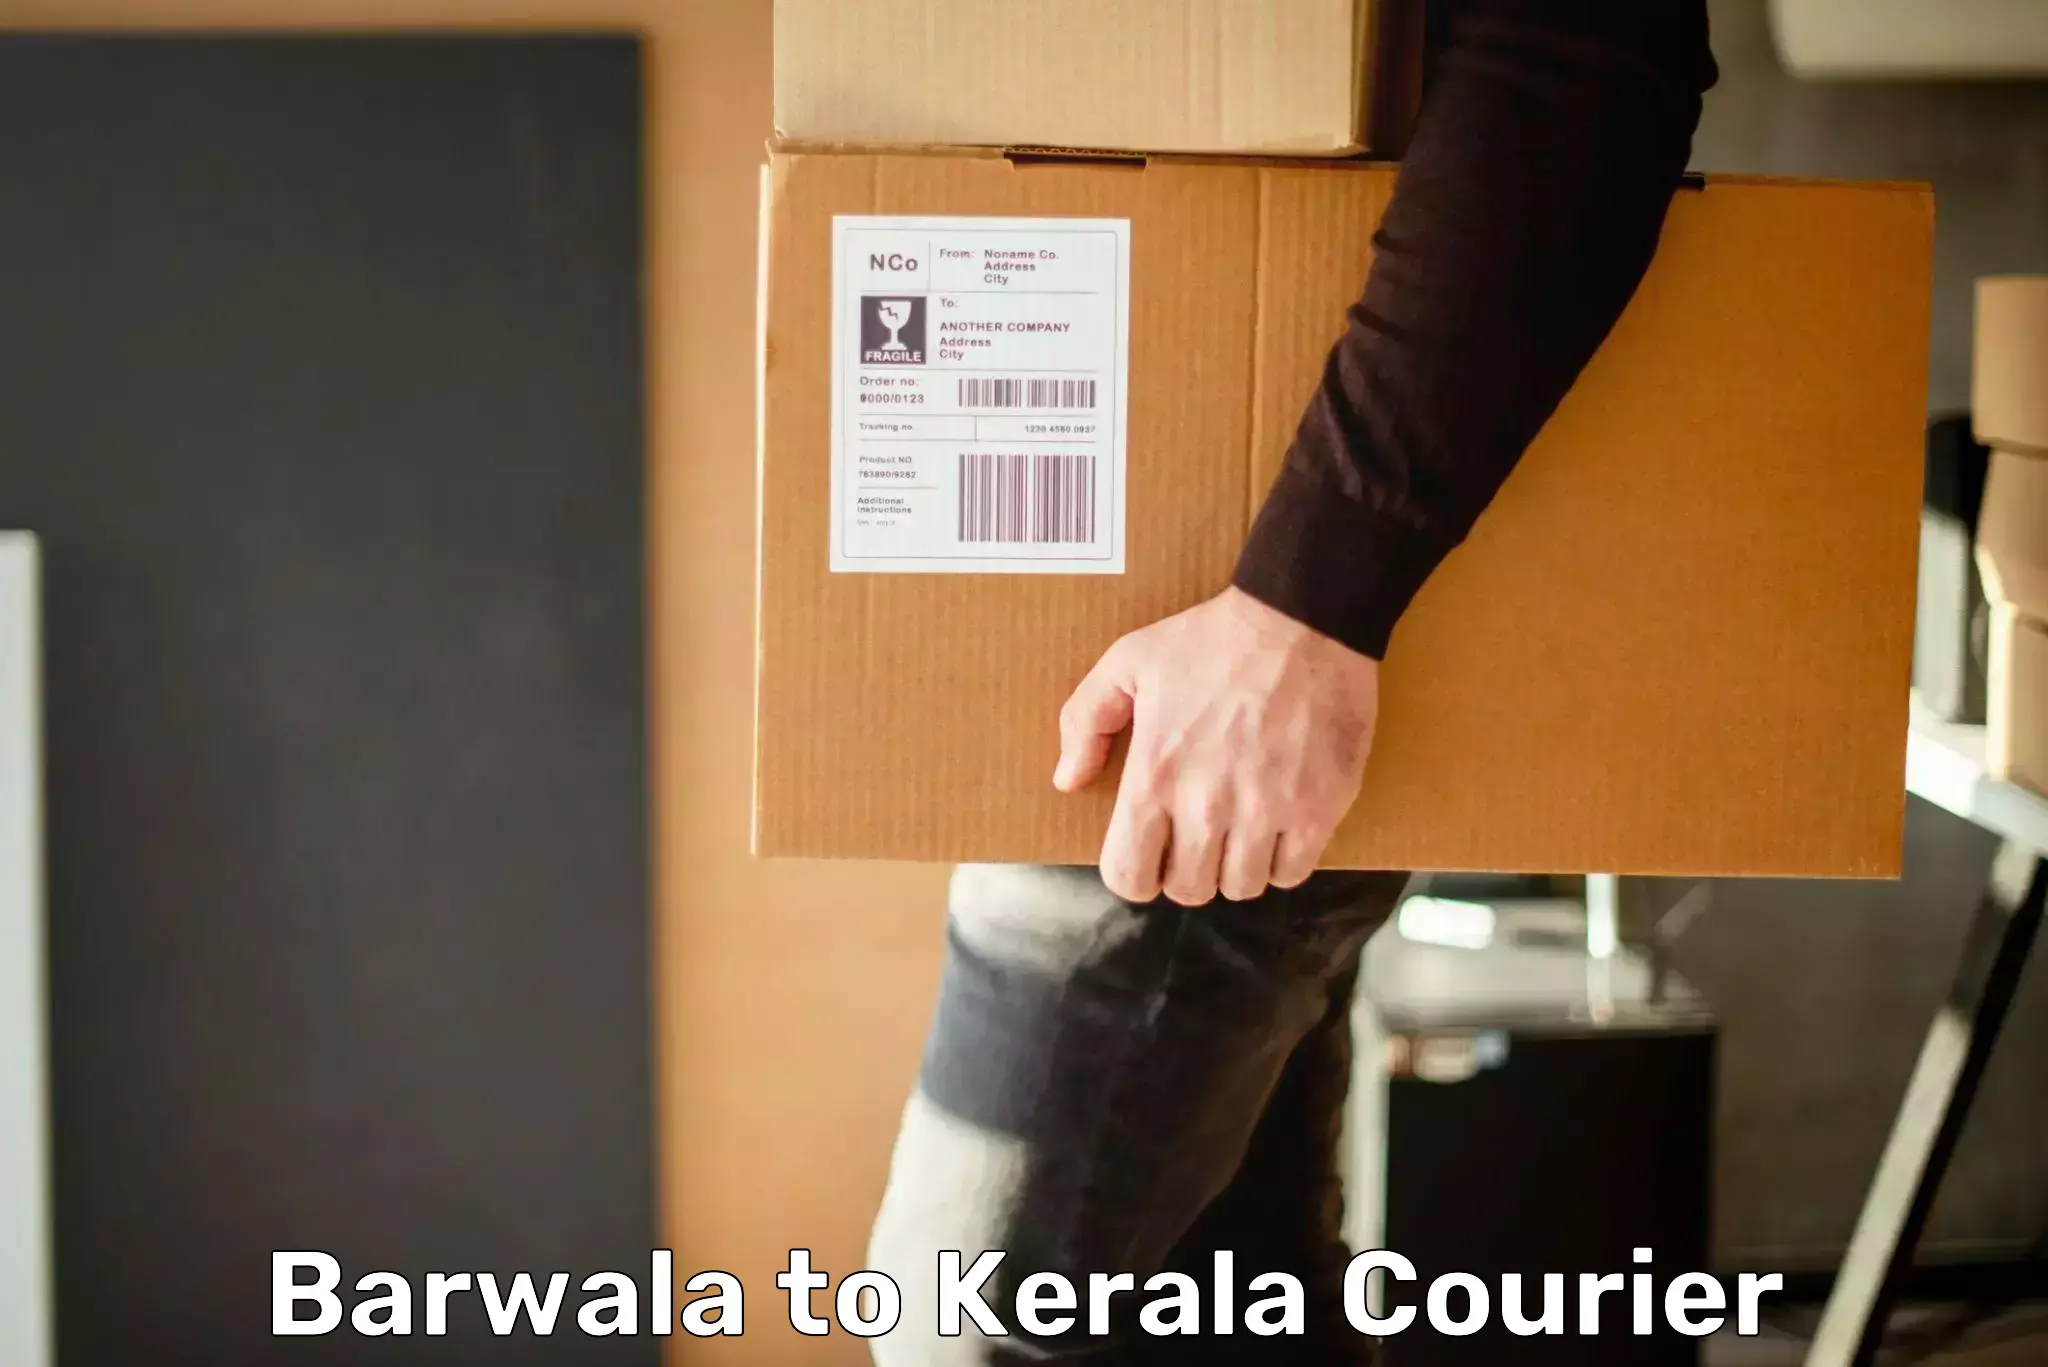 Express delivery network Barwala to Kerala